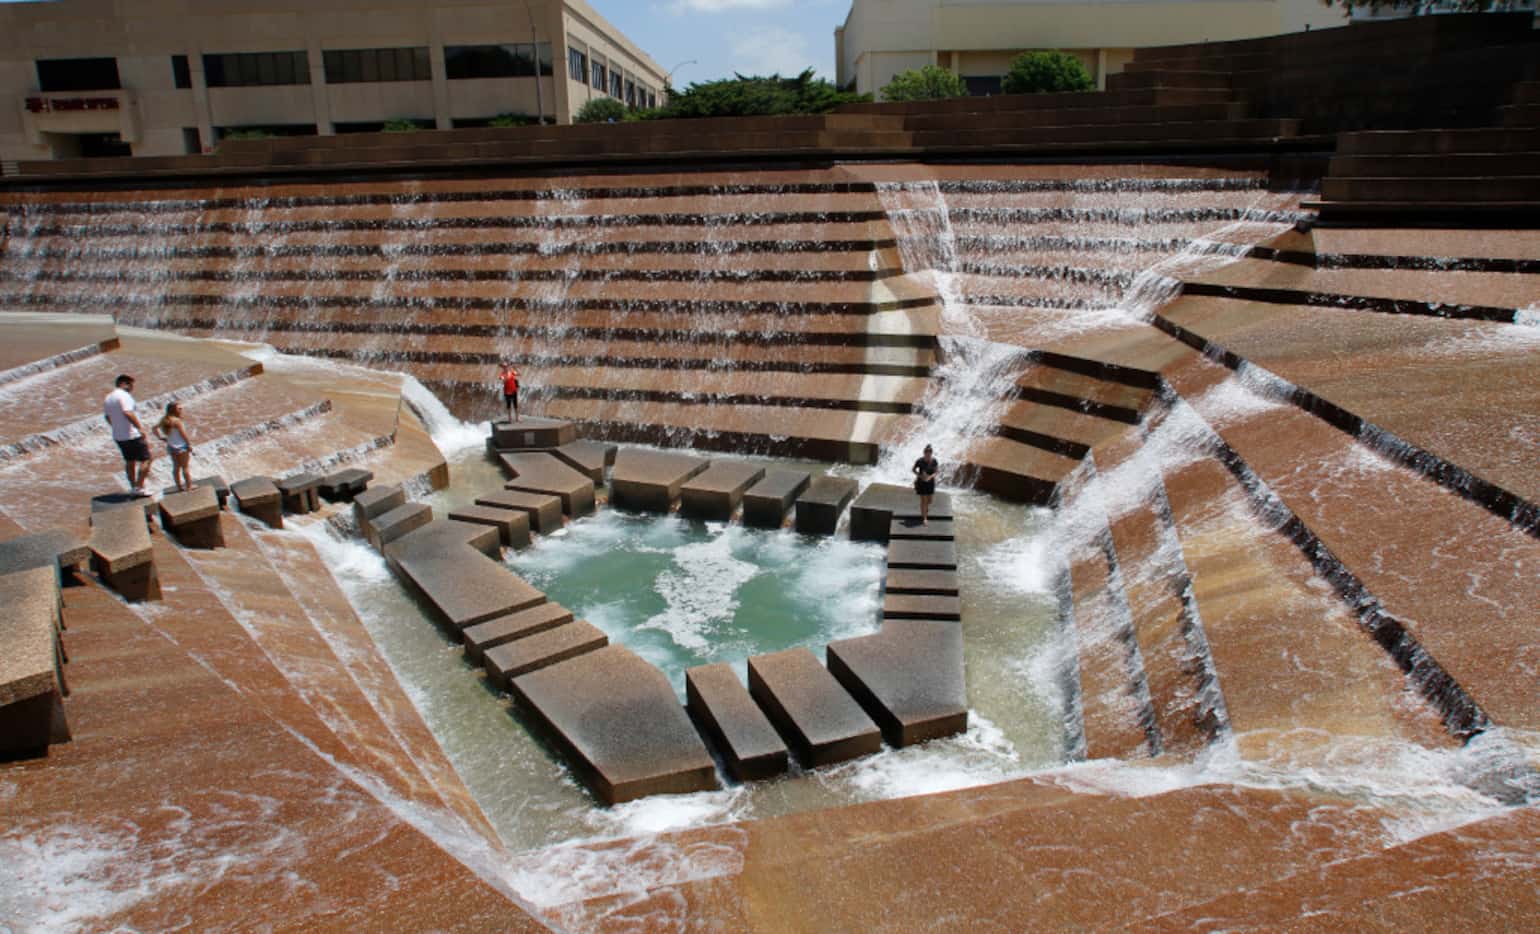 The Fort Worth Water Gardens were built in 1974.